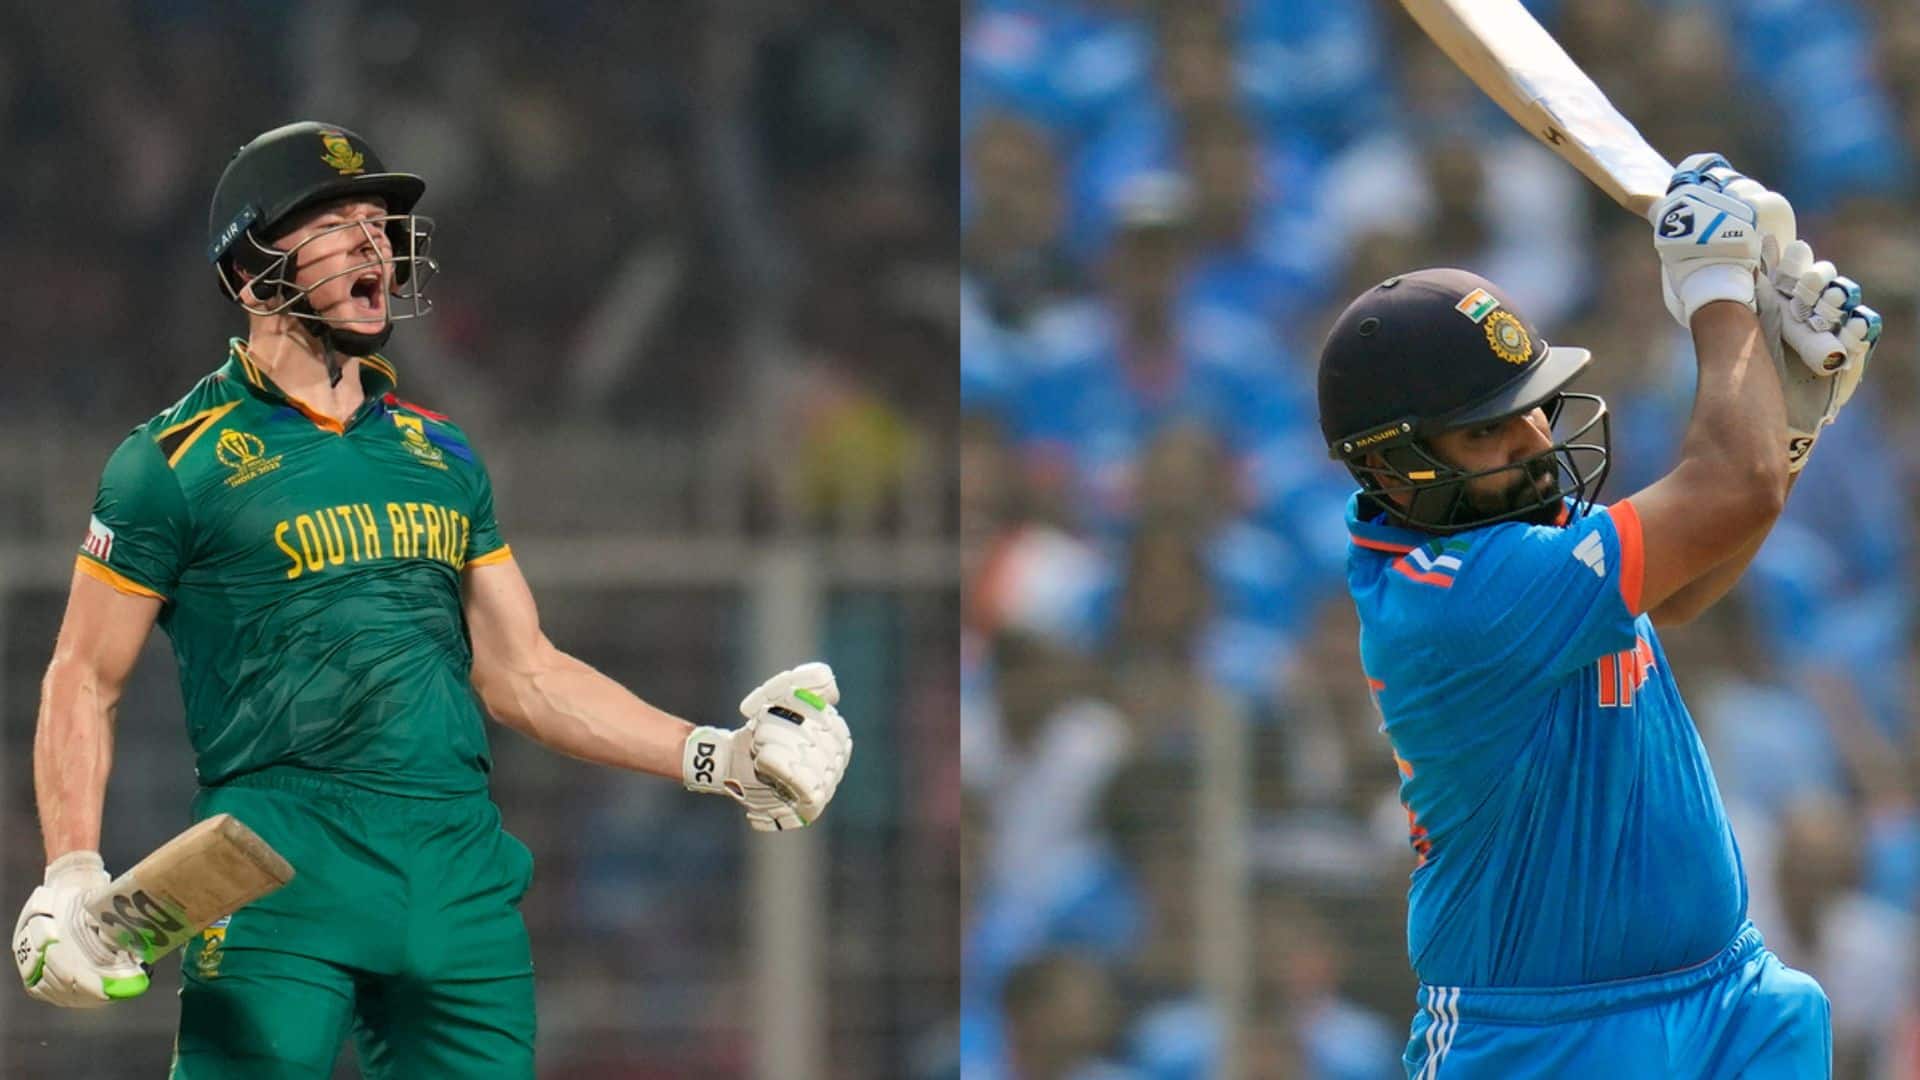 IND vs SA 1st T20I | David Miller To Dethrone Rohit Sharma In Rivalry’s Most Run-Getter Tally